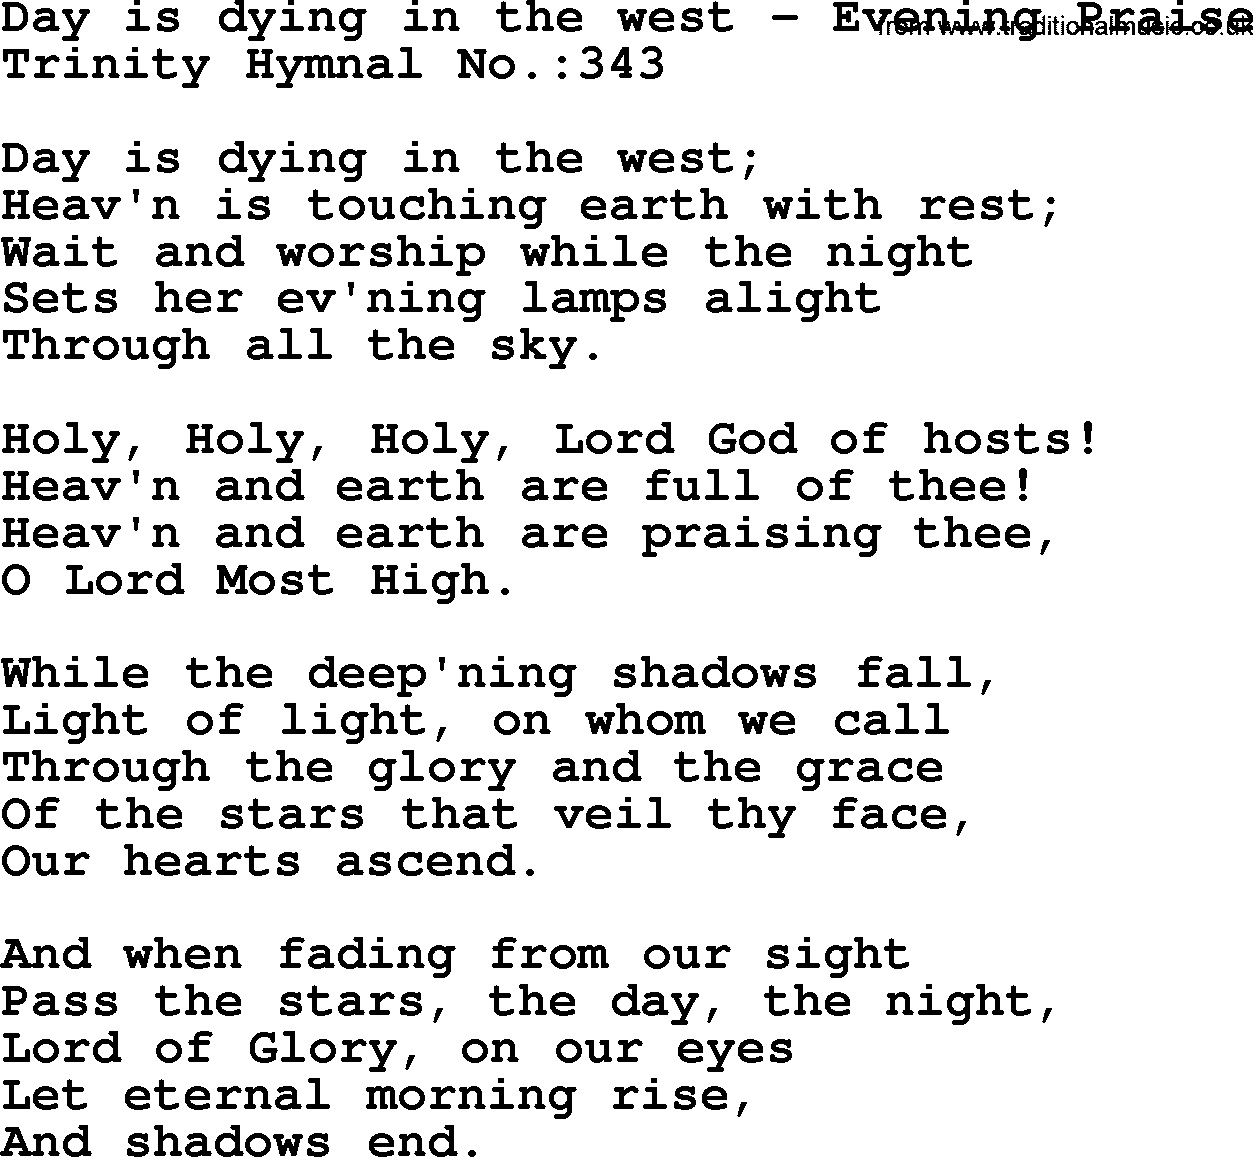 Trinity Hymnal Hymn: Day Is Dying In The West--Evening Praise, lyrics with midi music